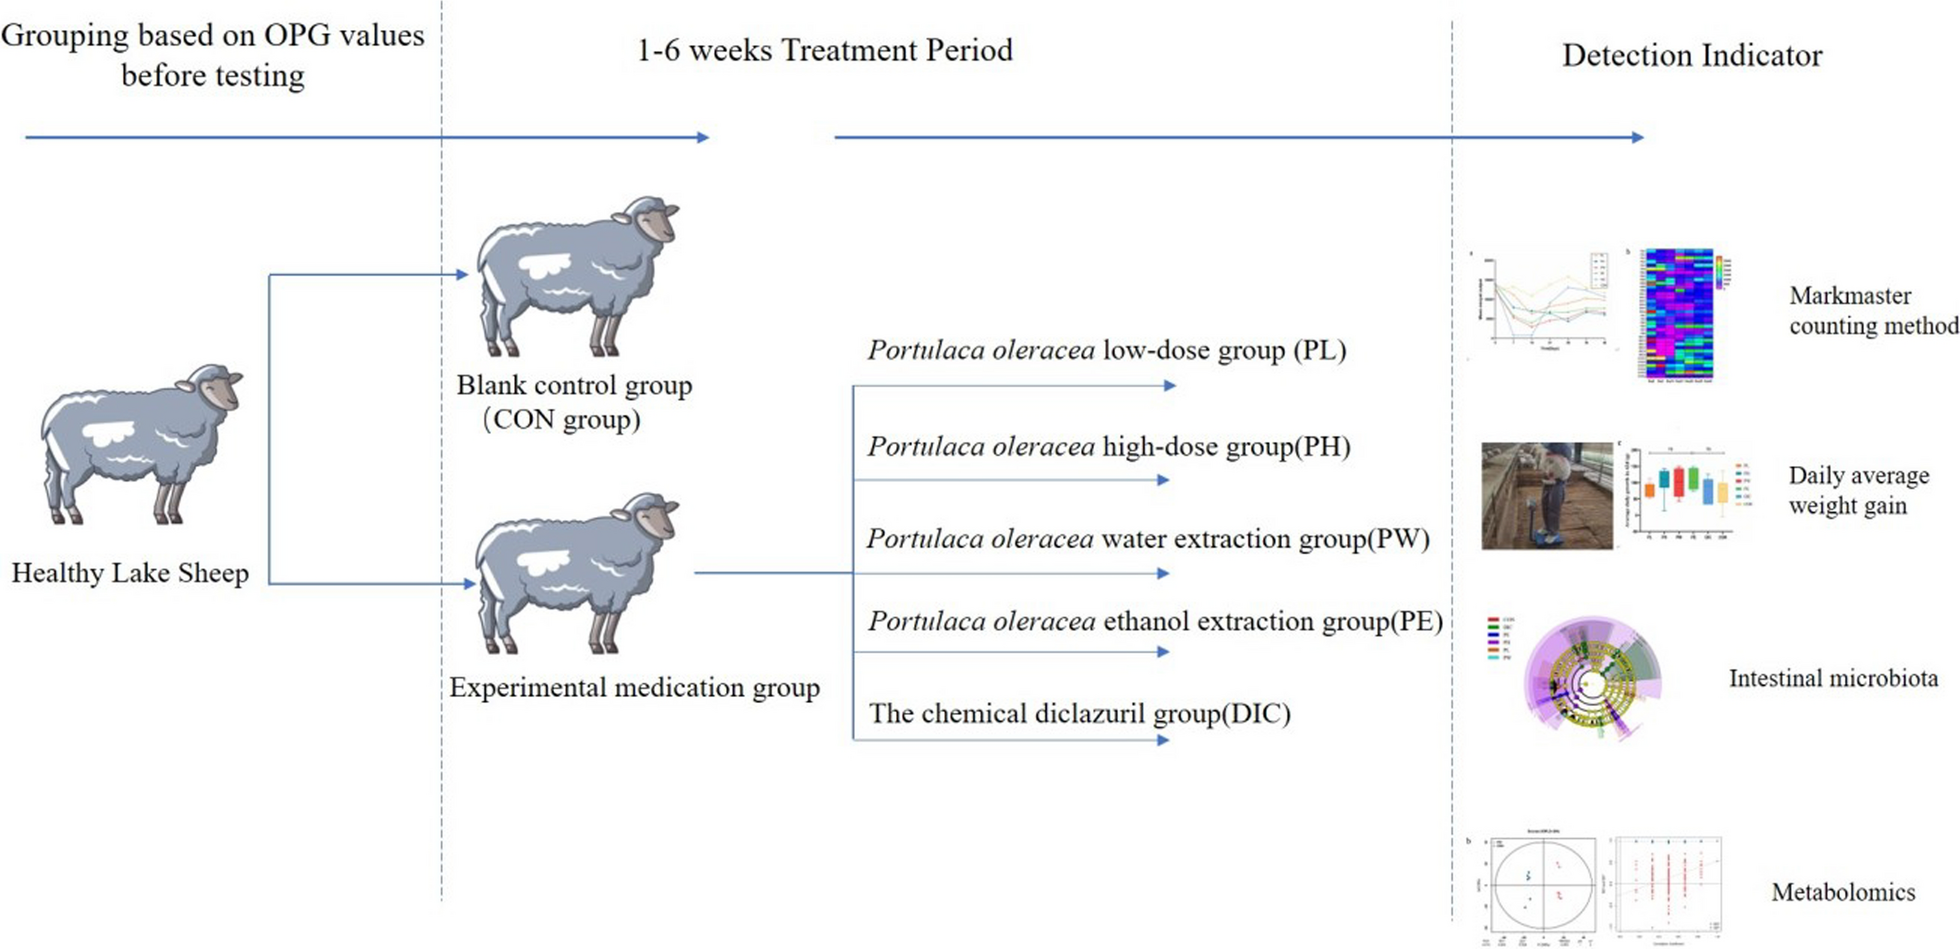 Portulaca oleracea exhibited anti-coccidian activity, fortified the gut microbiota of Hu lambs